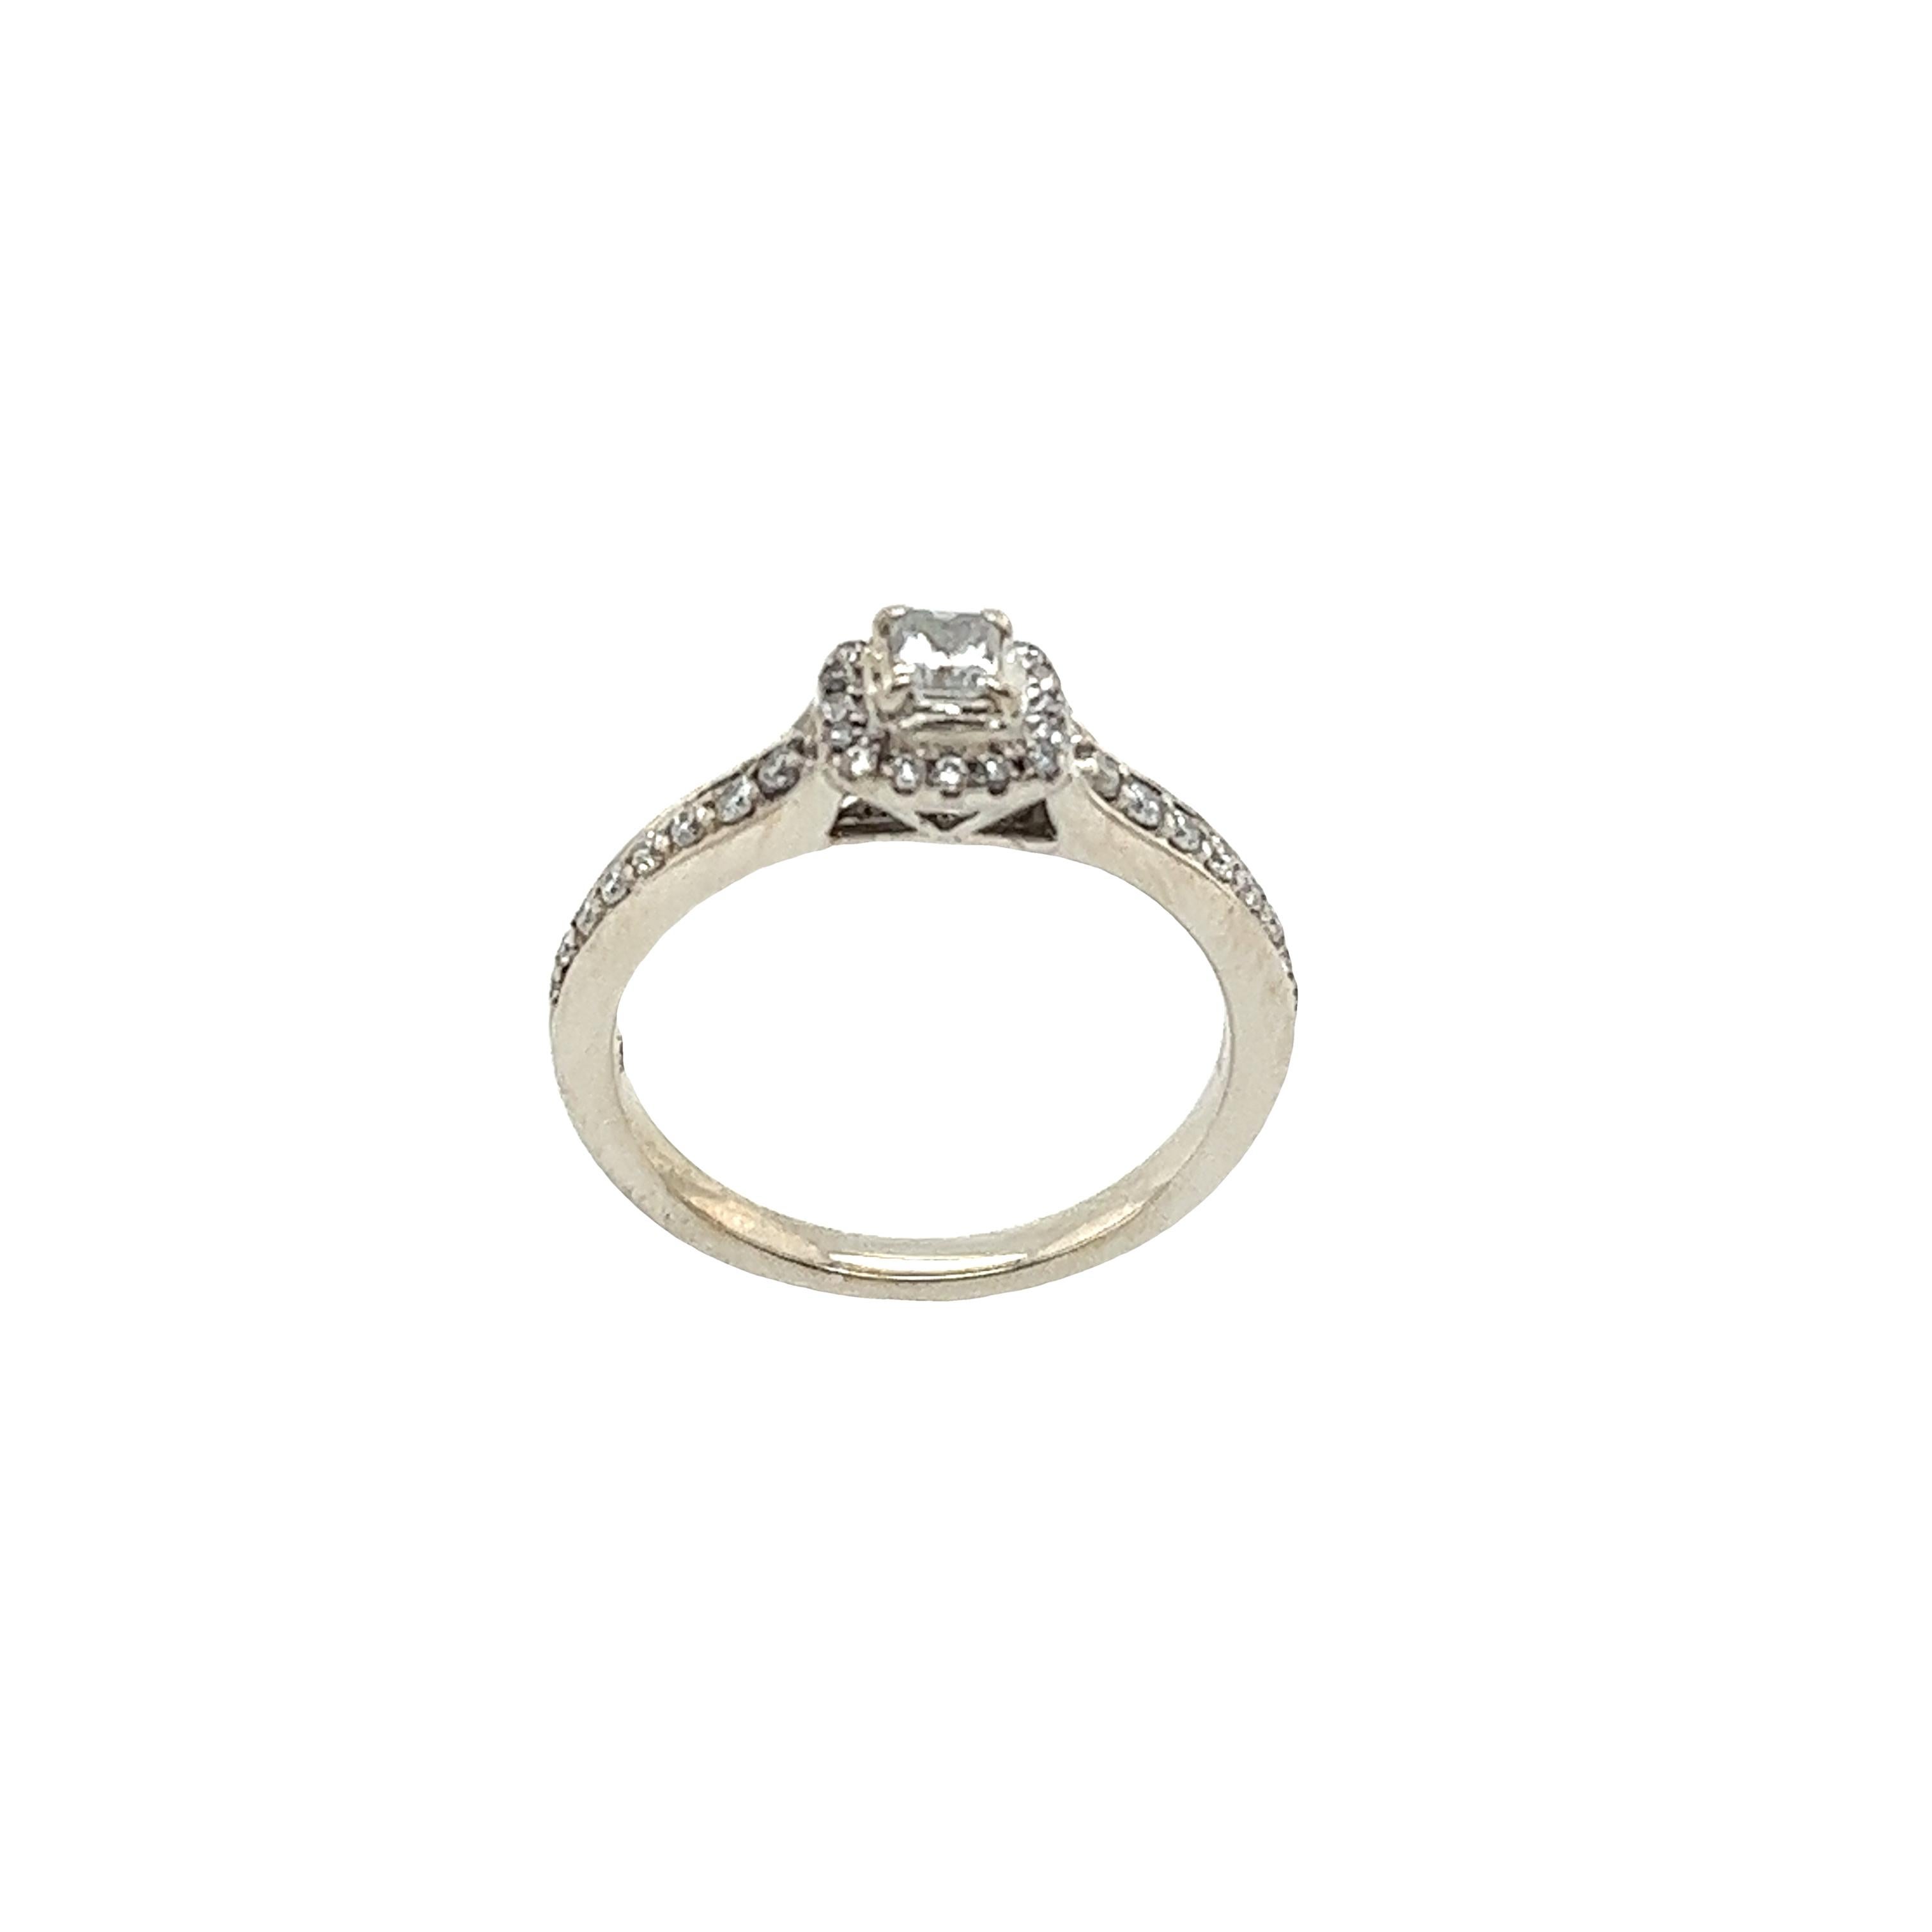 18ct White Gold Diamond Solitaire Ring Set With 0.50ct of Diamonds 1